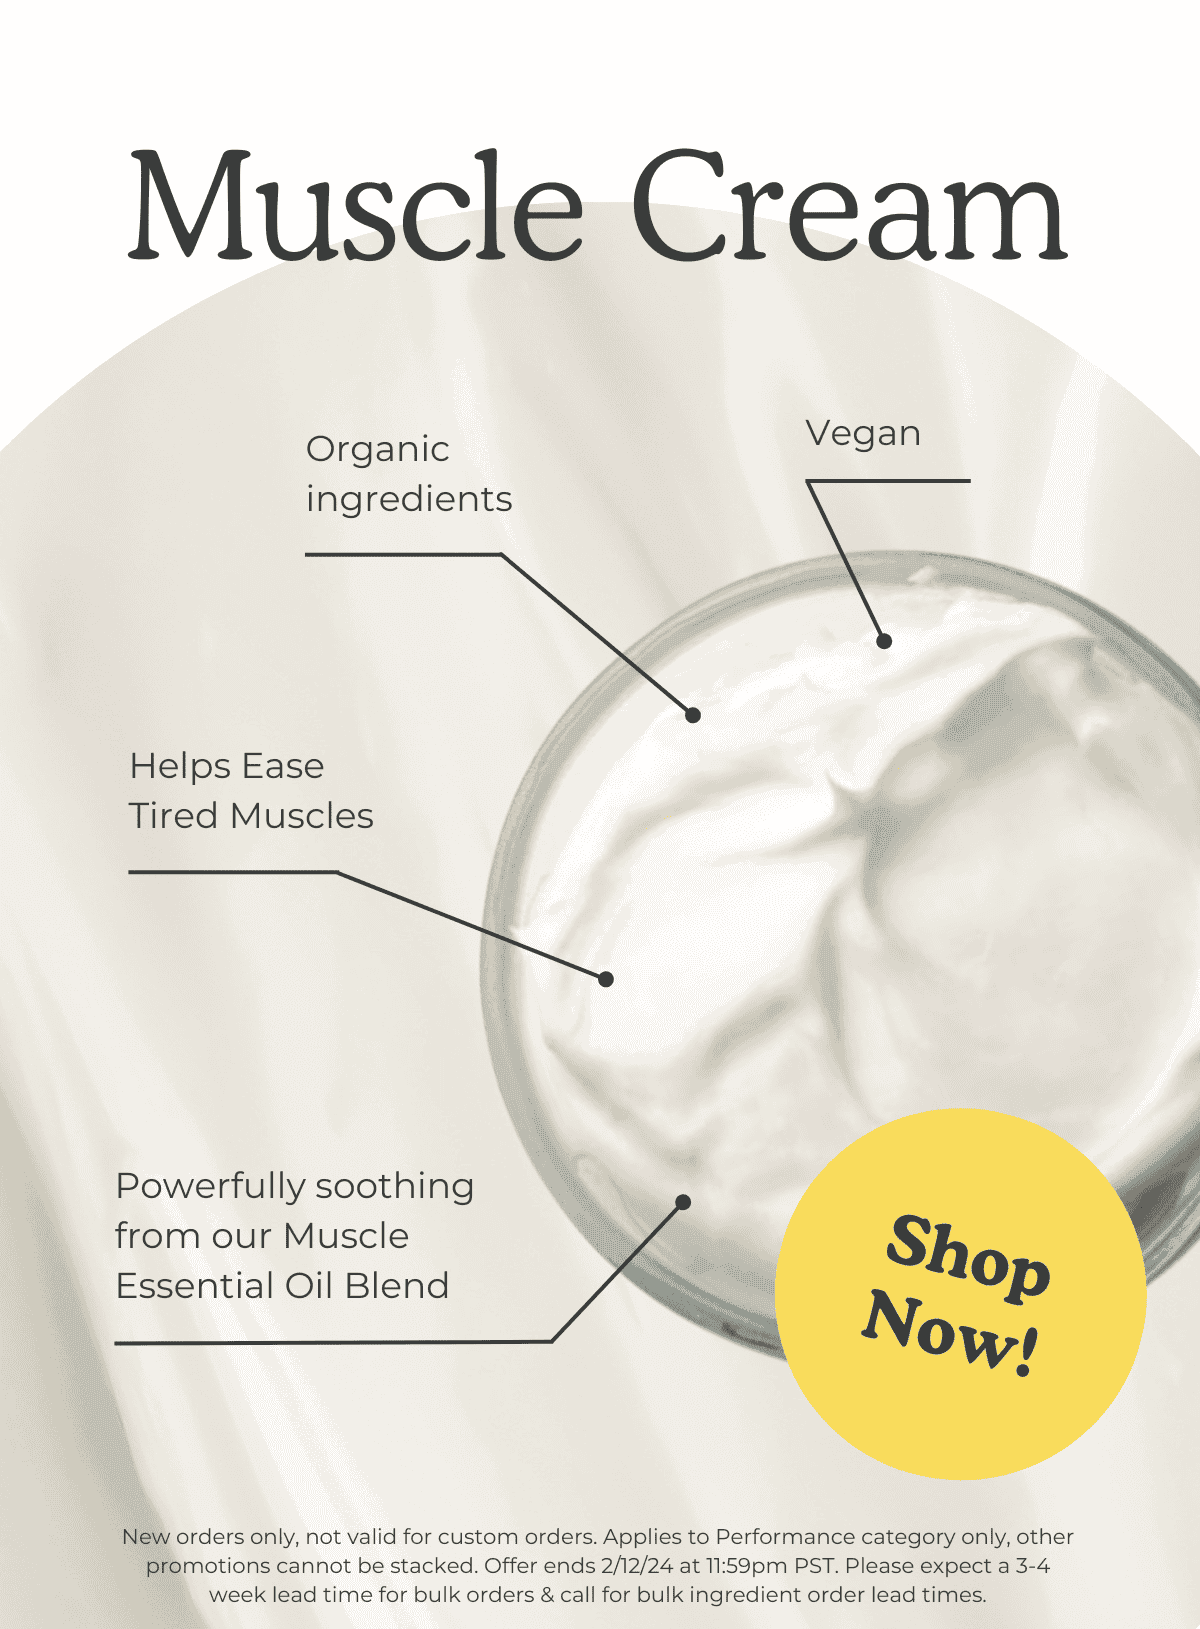 Muscle Cream: Organic ingredients, vegan, helps ease tired muscles, powerfully soothing from our Muscle Essential Oil Blend. SHOP NOW! *New orders only, not valid for custom orders. Applies to Performance category only, other promotions cannot be stacked. Offer ends 2/12/24 at 11:59pm PST. Please expect a 3-4 week lead time for bulk orders & call for bulk ingredient order lead times.